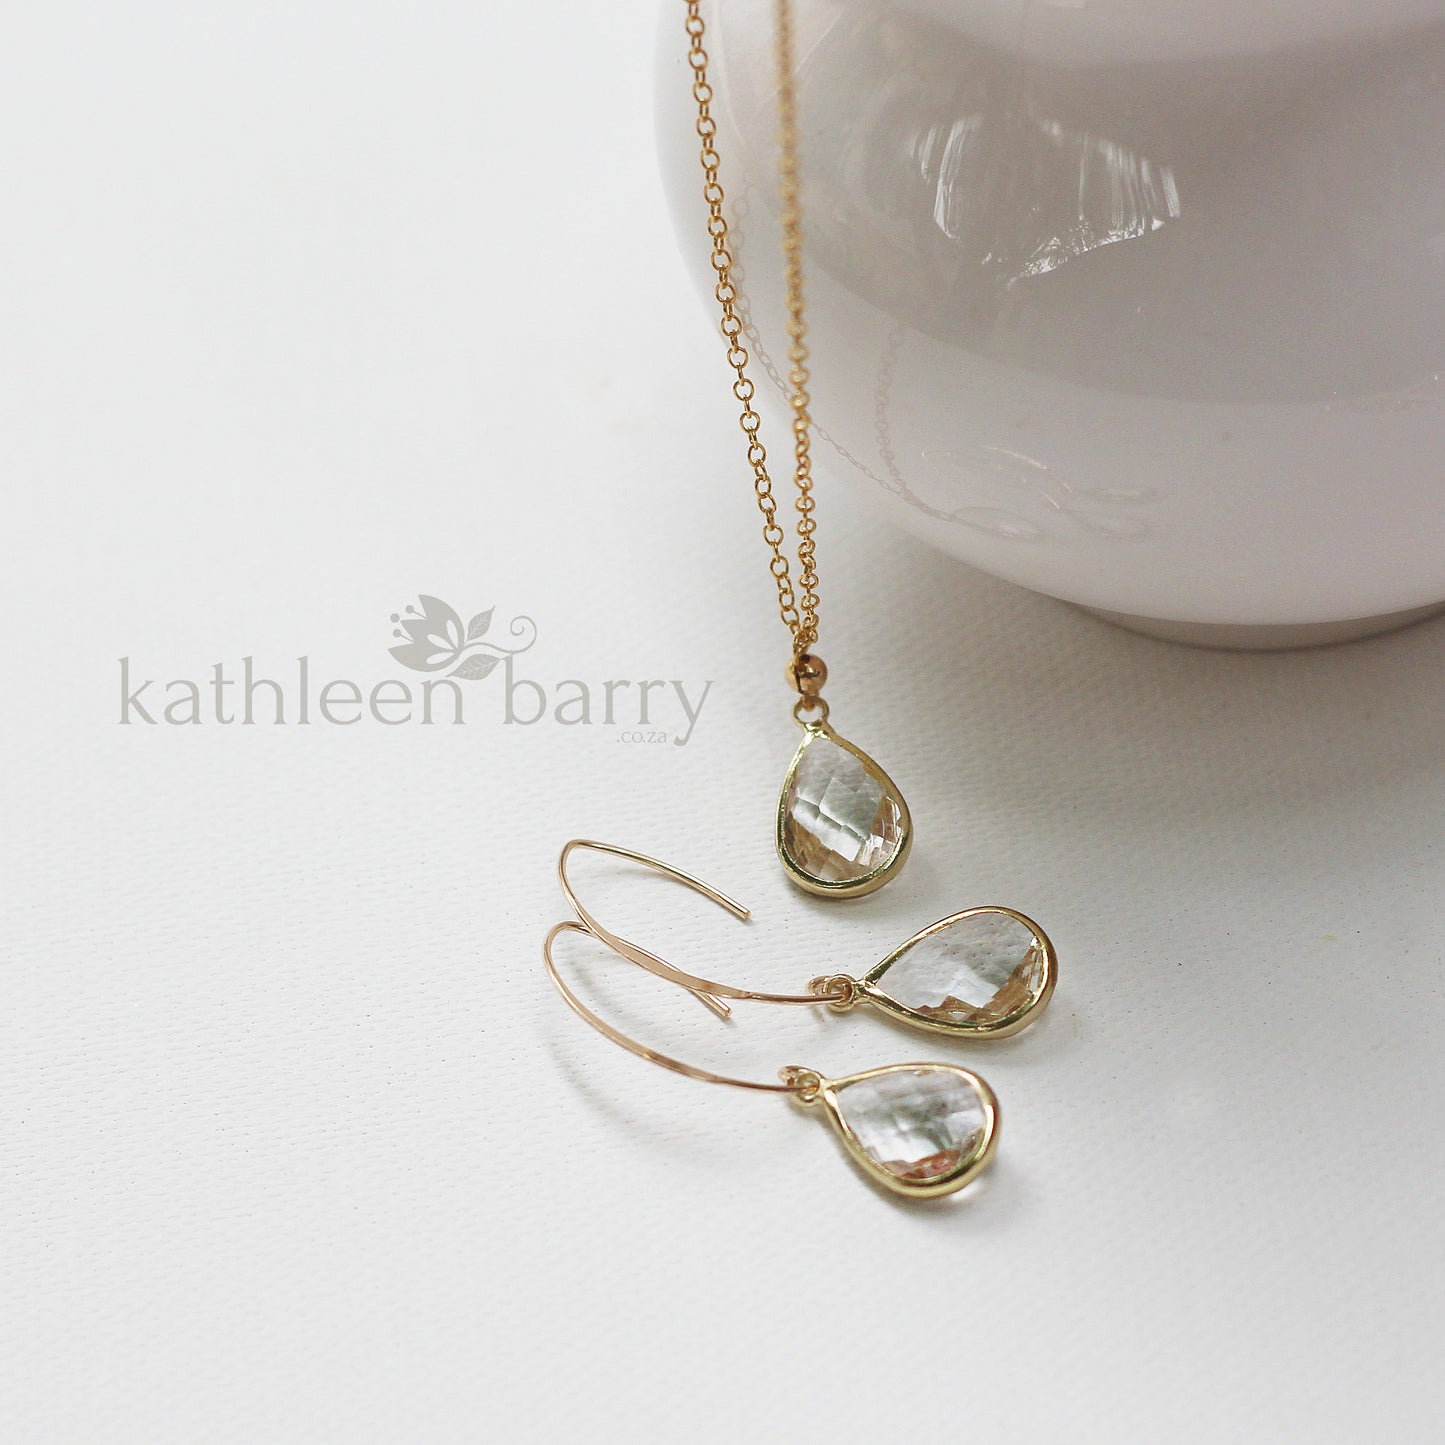 Elaine necklace - pendent on chain (gold and silver finish only)